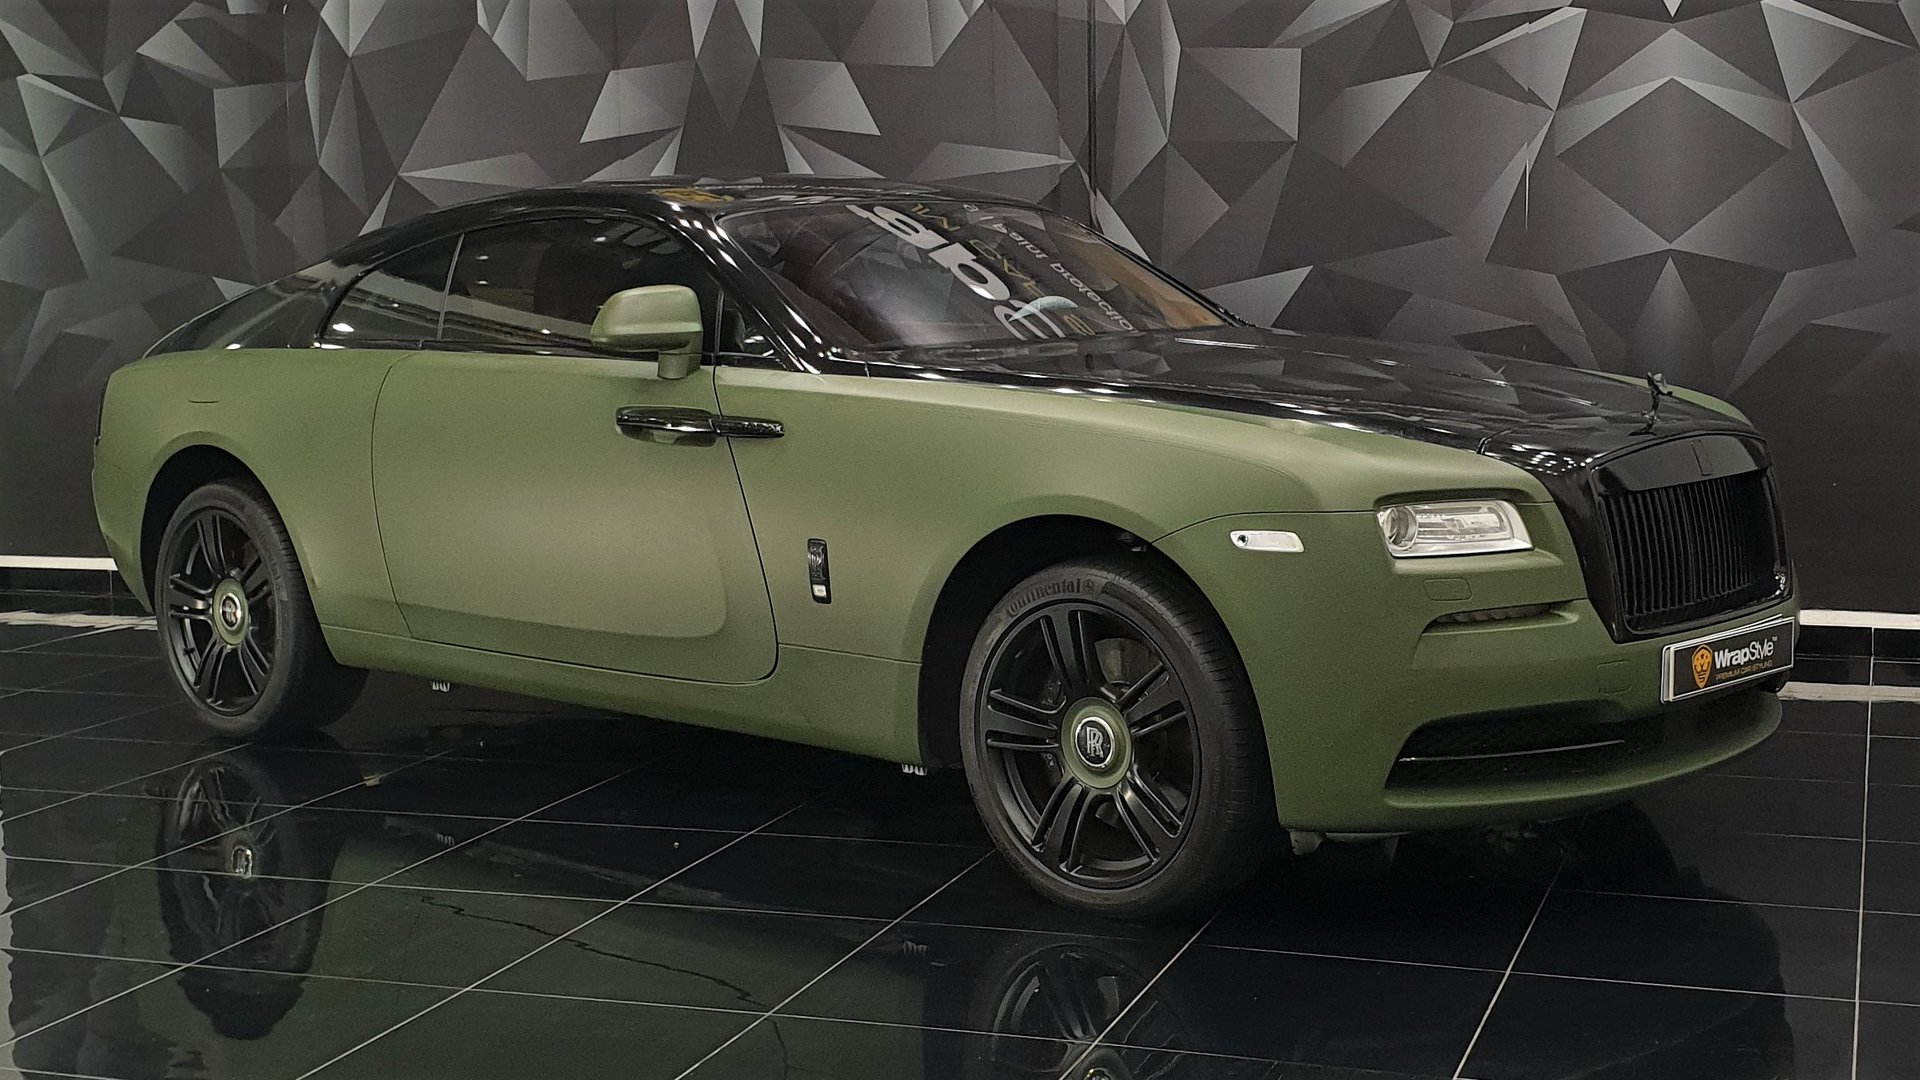 Used Green RollsRoyce Wraith Cars For Sale  AutoTrader UK